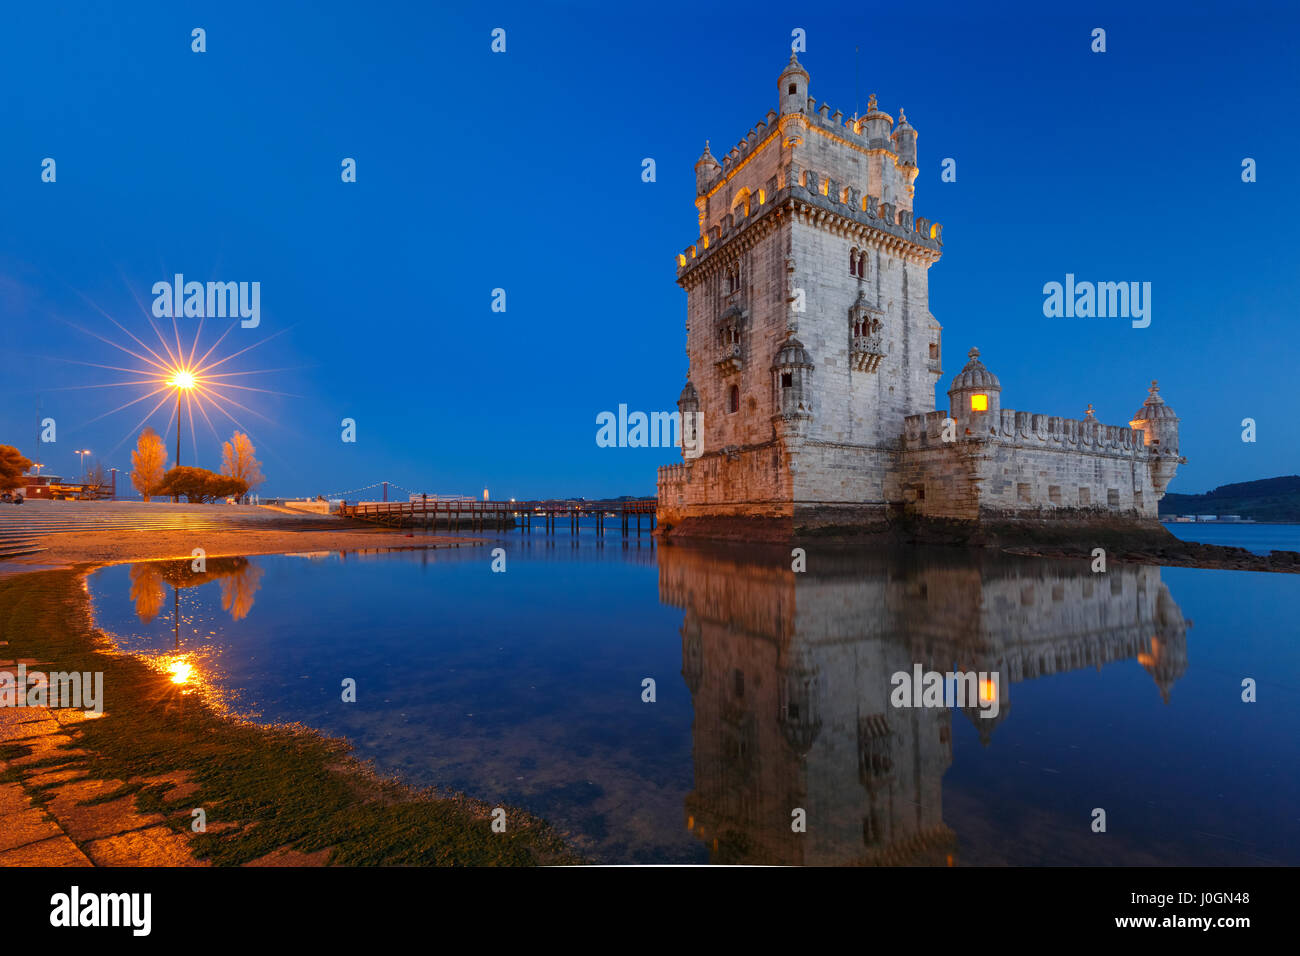 Belem Tower or Tower of St Vincent on the bank of the Tagus River during evening blue hour, Lisbon, Portugal Stock Photo